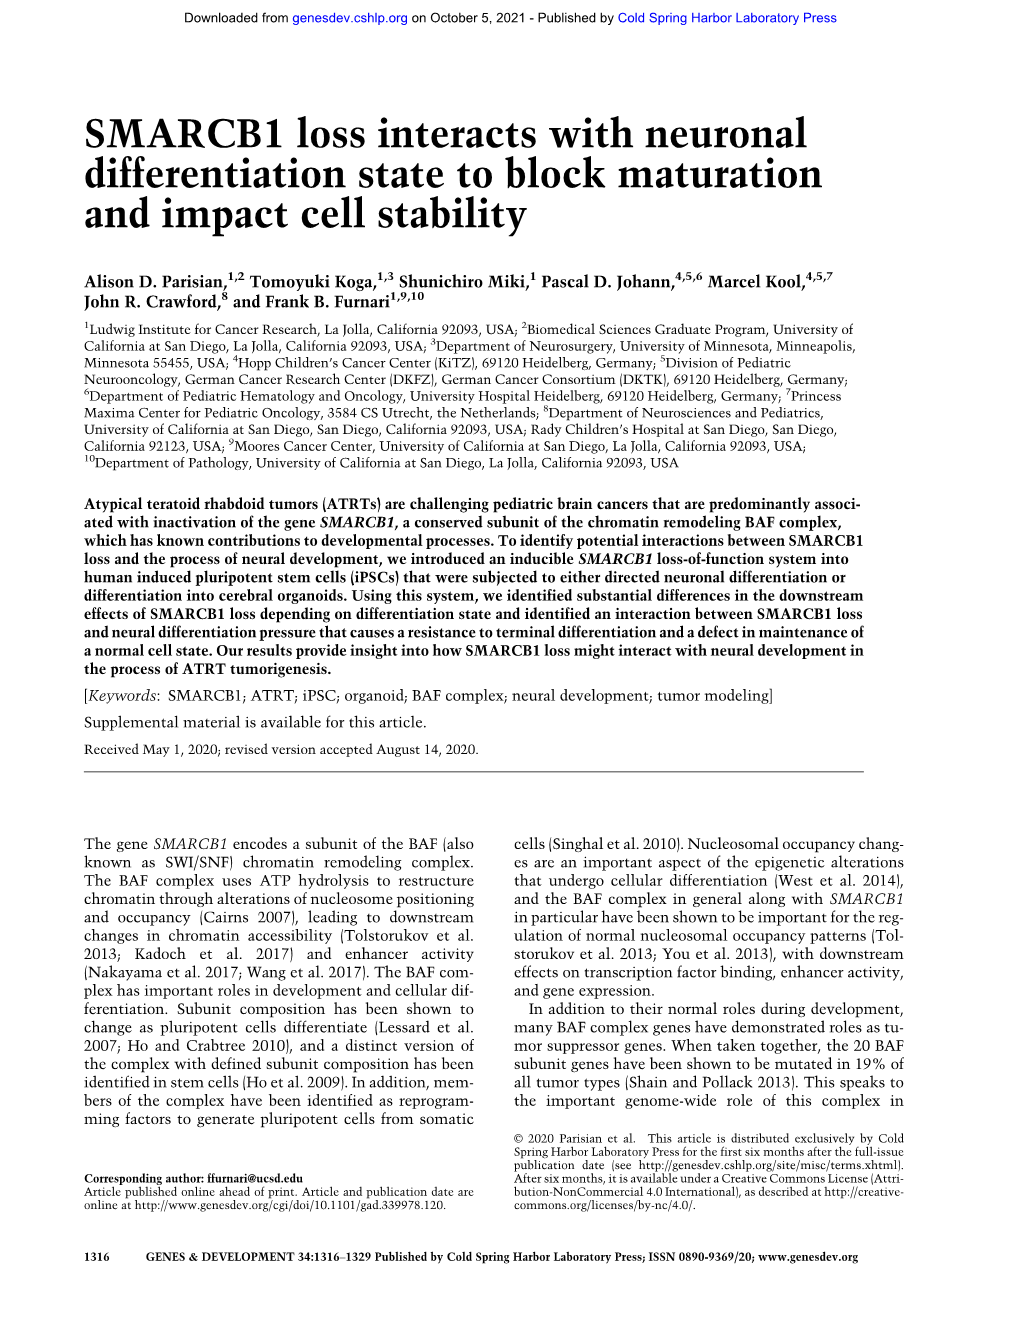 SMARCB1 Loss Interacts with Neuronal Differentiation State to Block Maturation and Impact Cell Stability